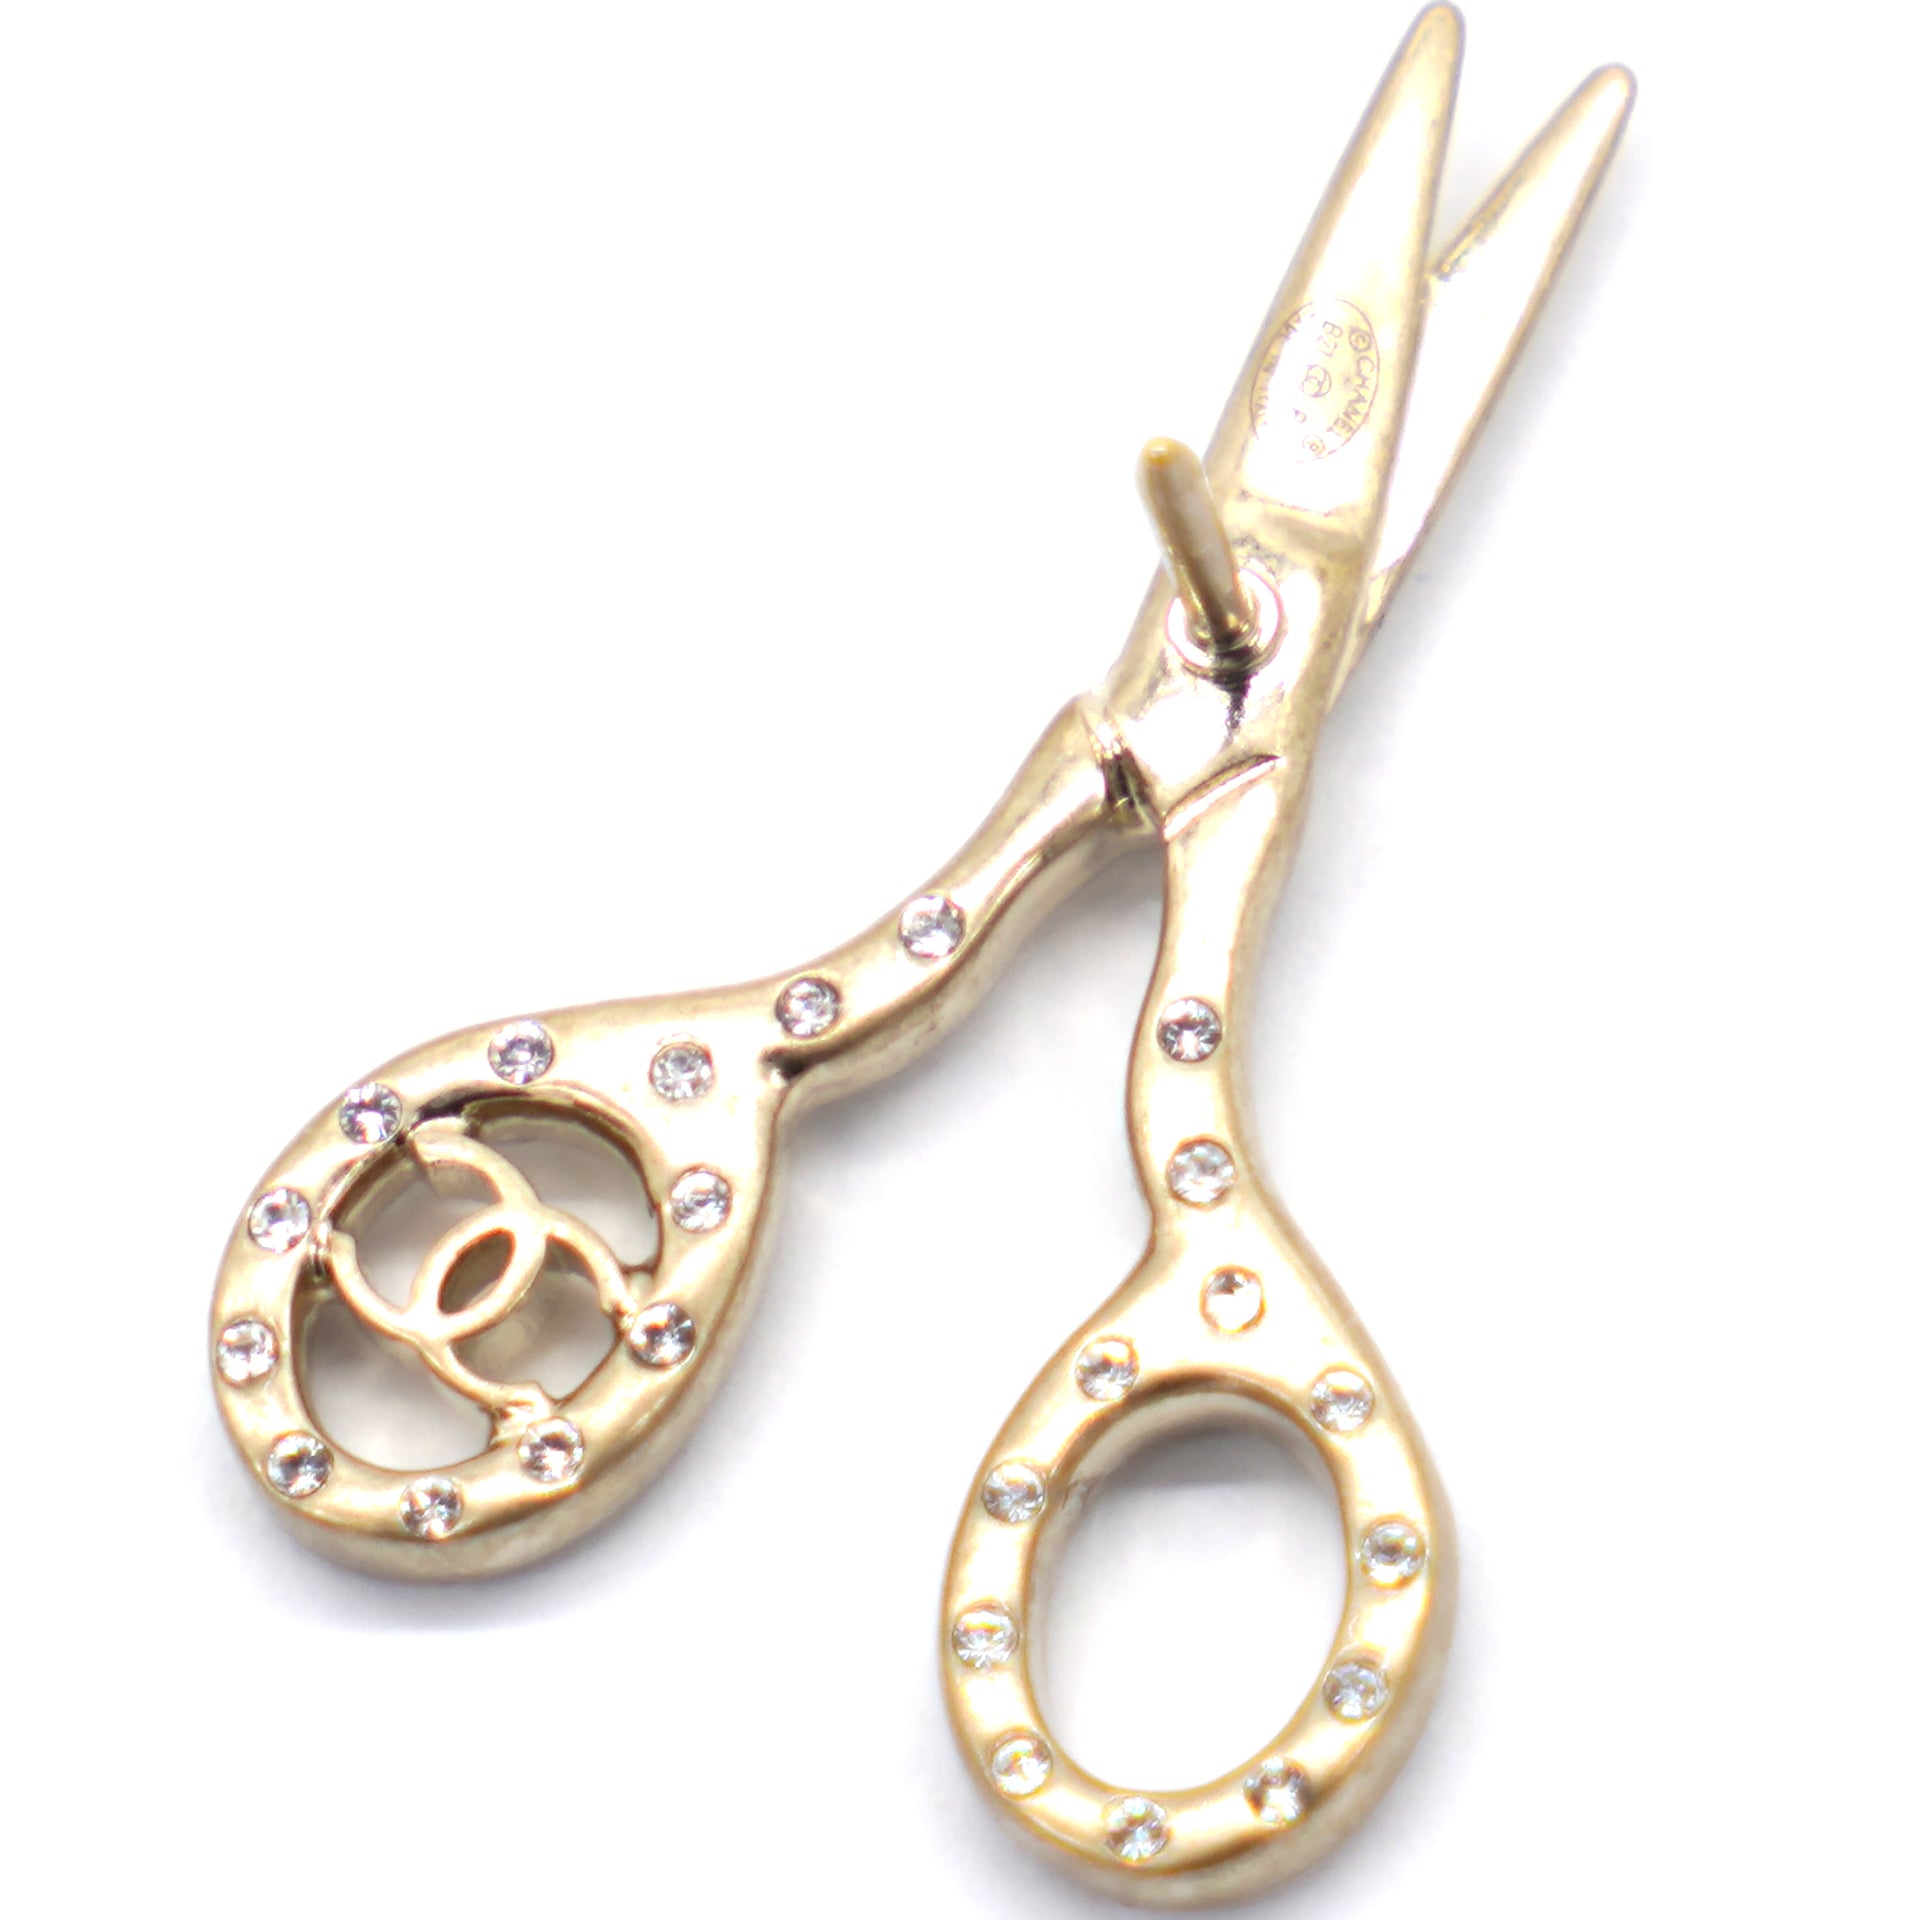 CC Heart Scissors Perfume Brooch Set Metal with Crystals